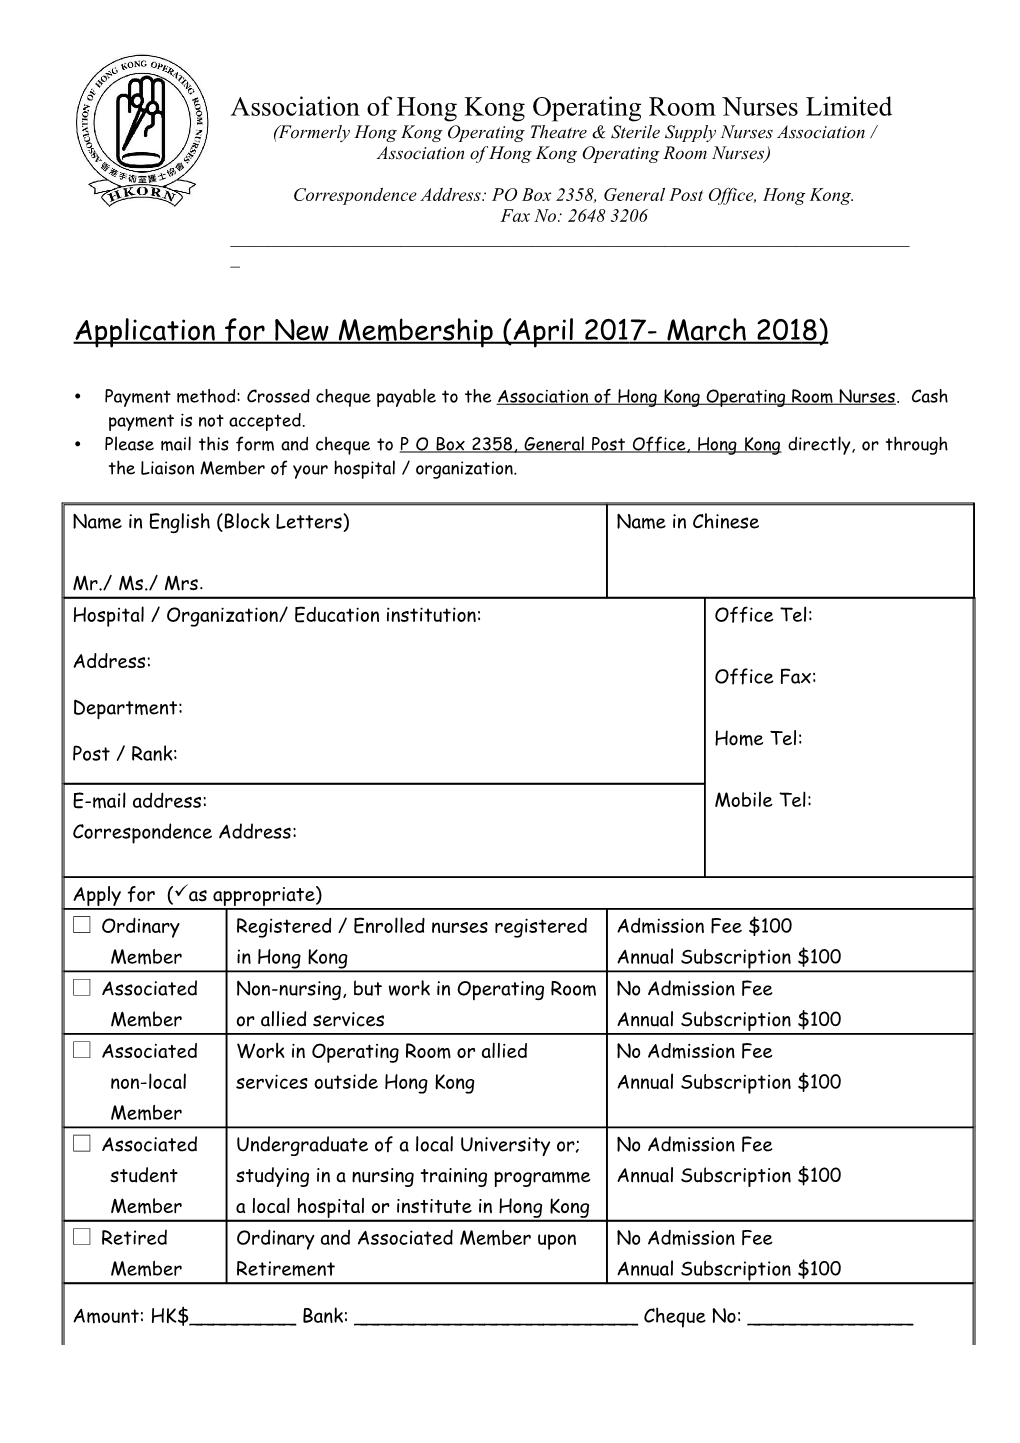 Application for New Membership (April 2017- March 2018)